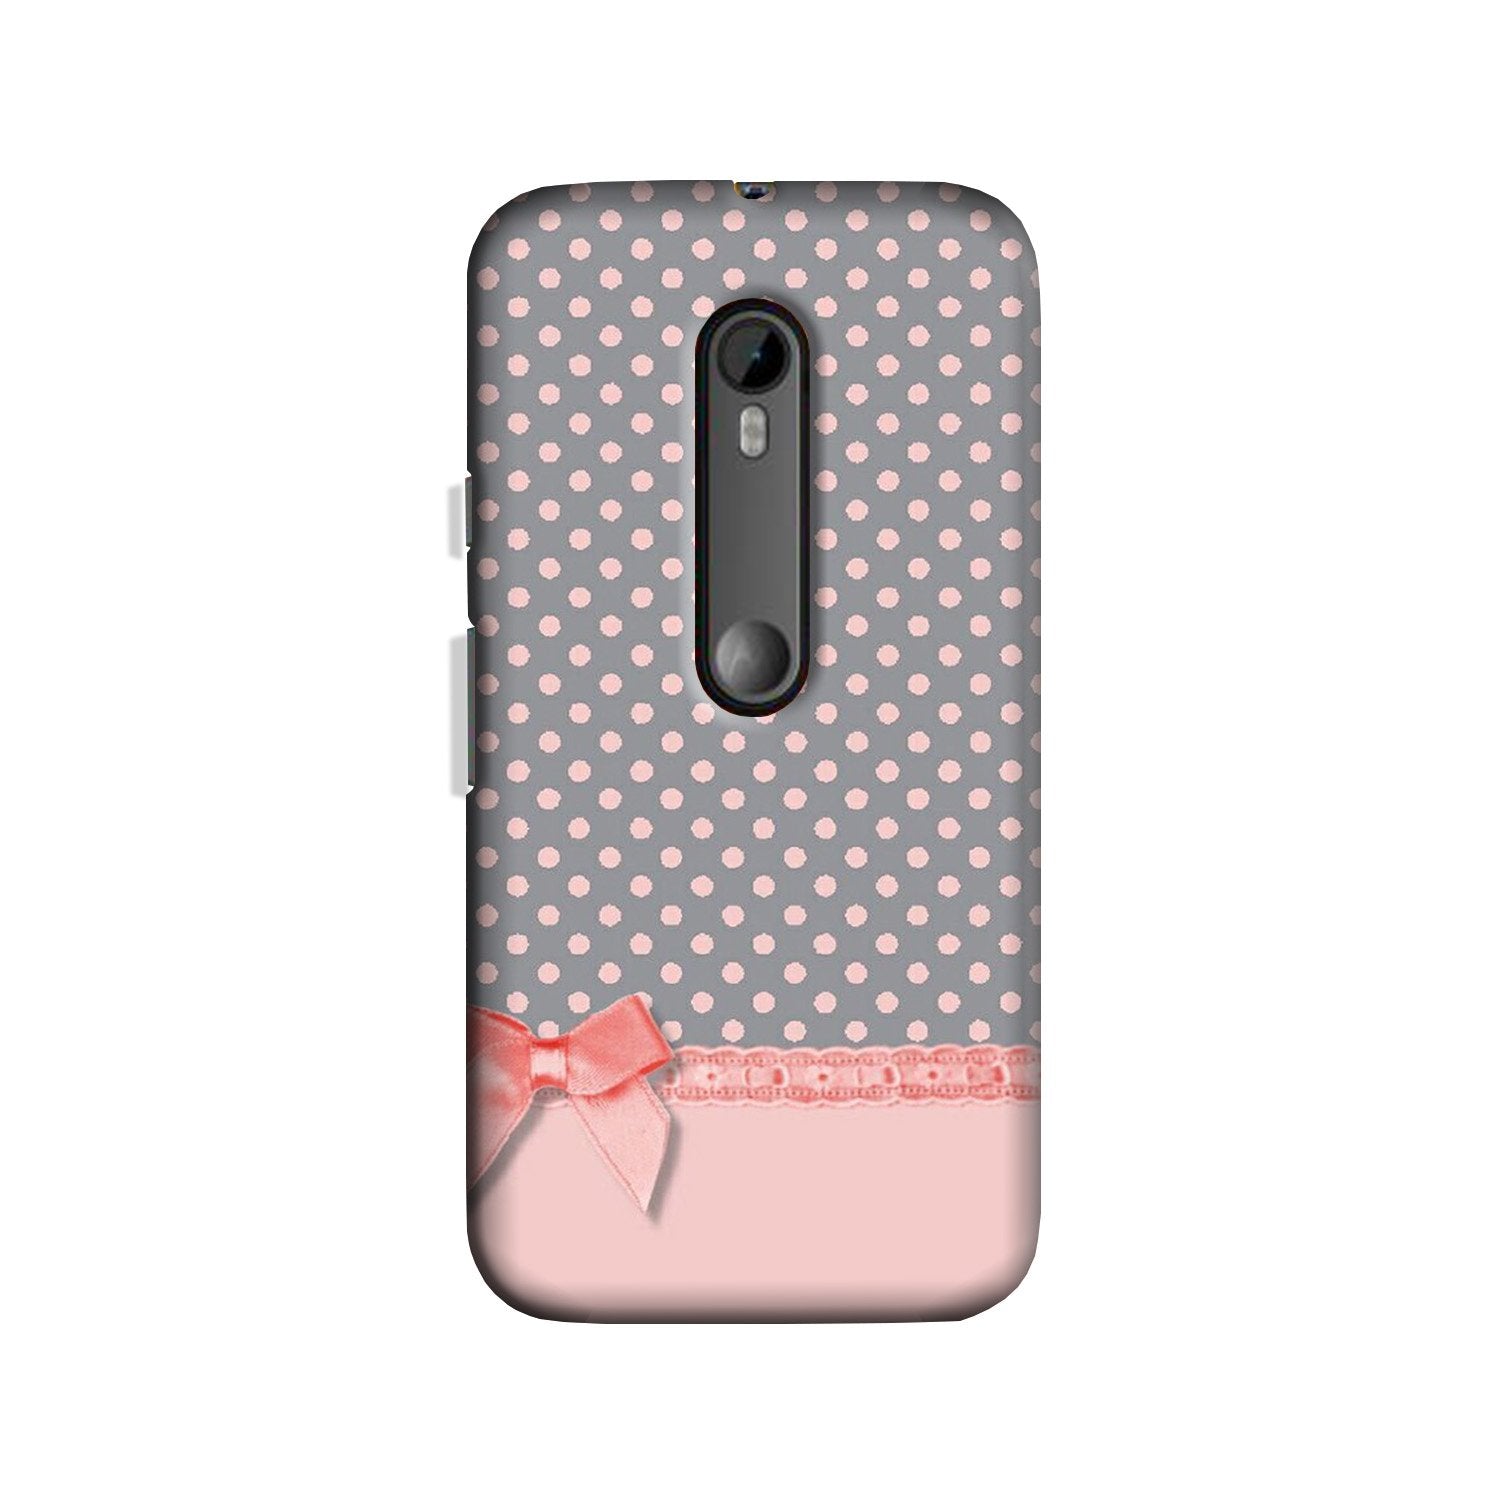 Gift Wrap2 Case for Moto X Play